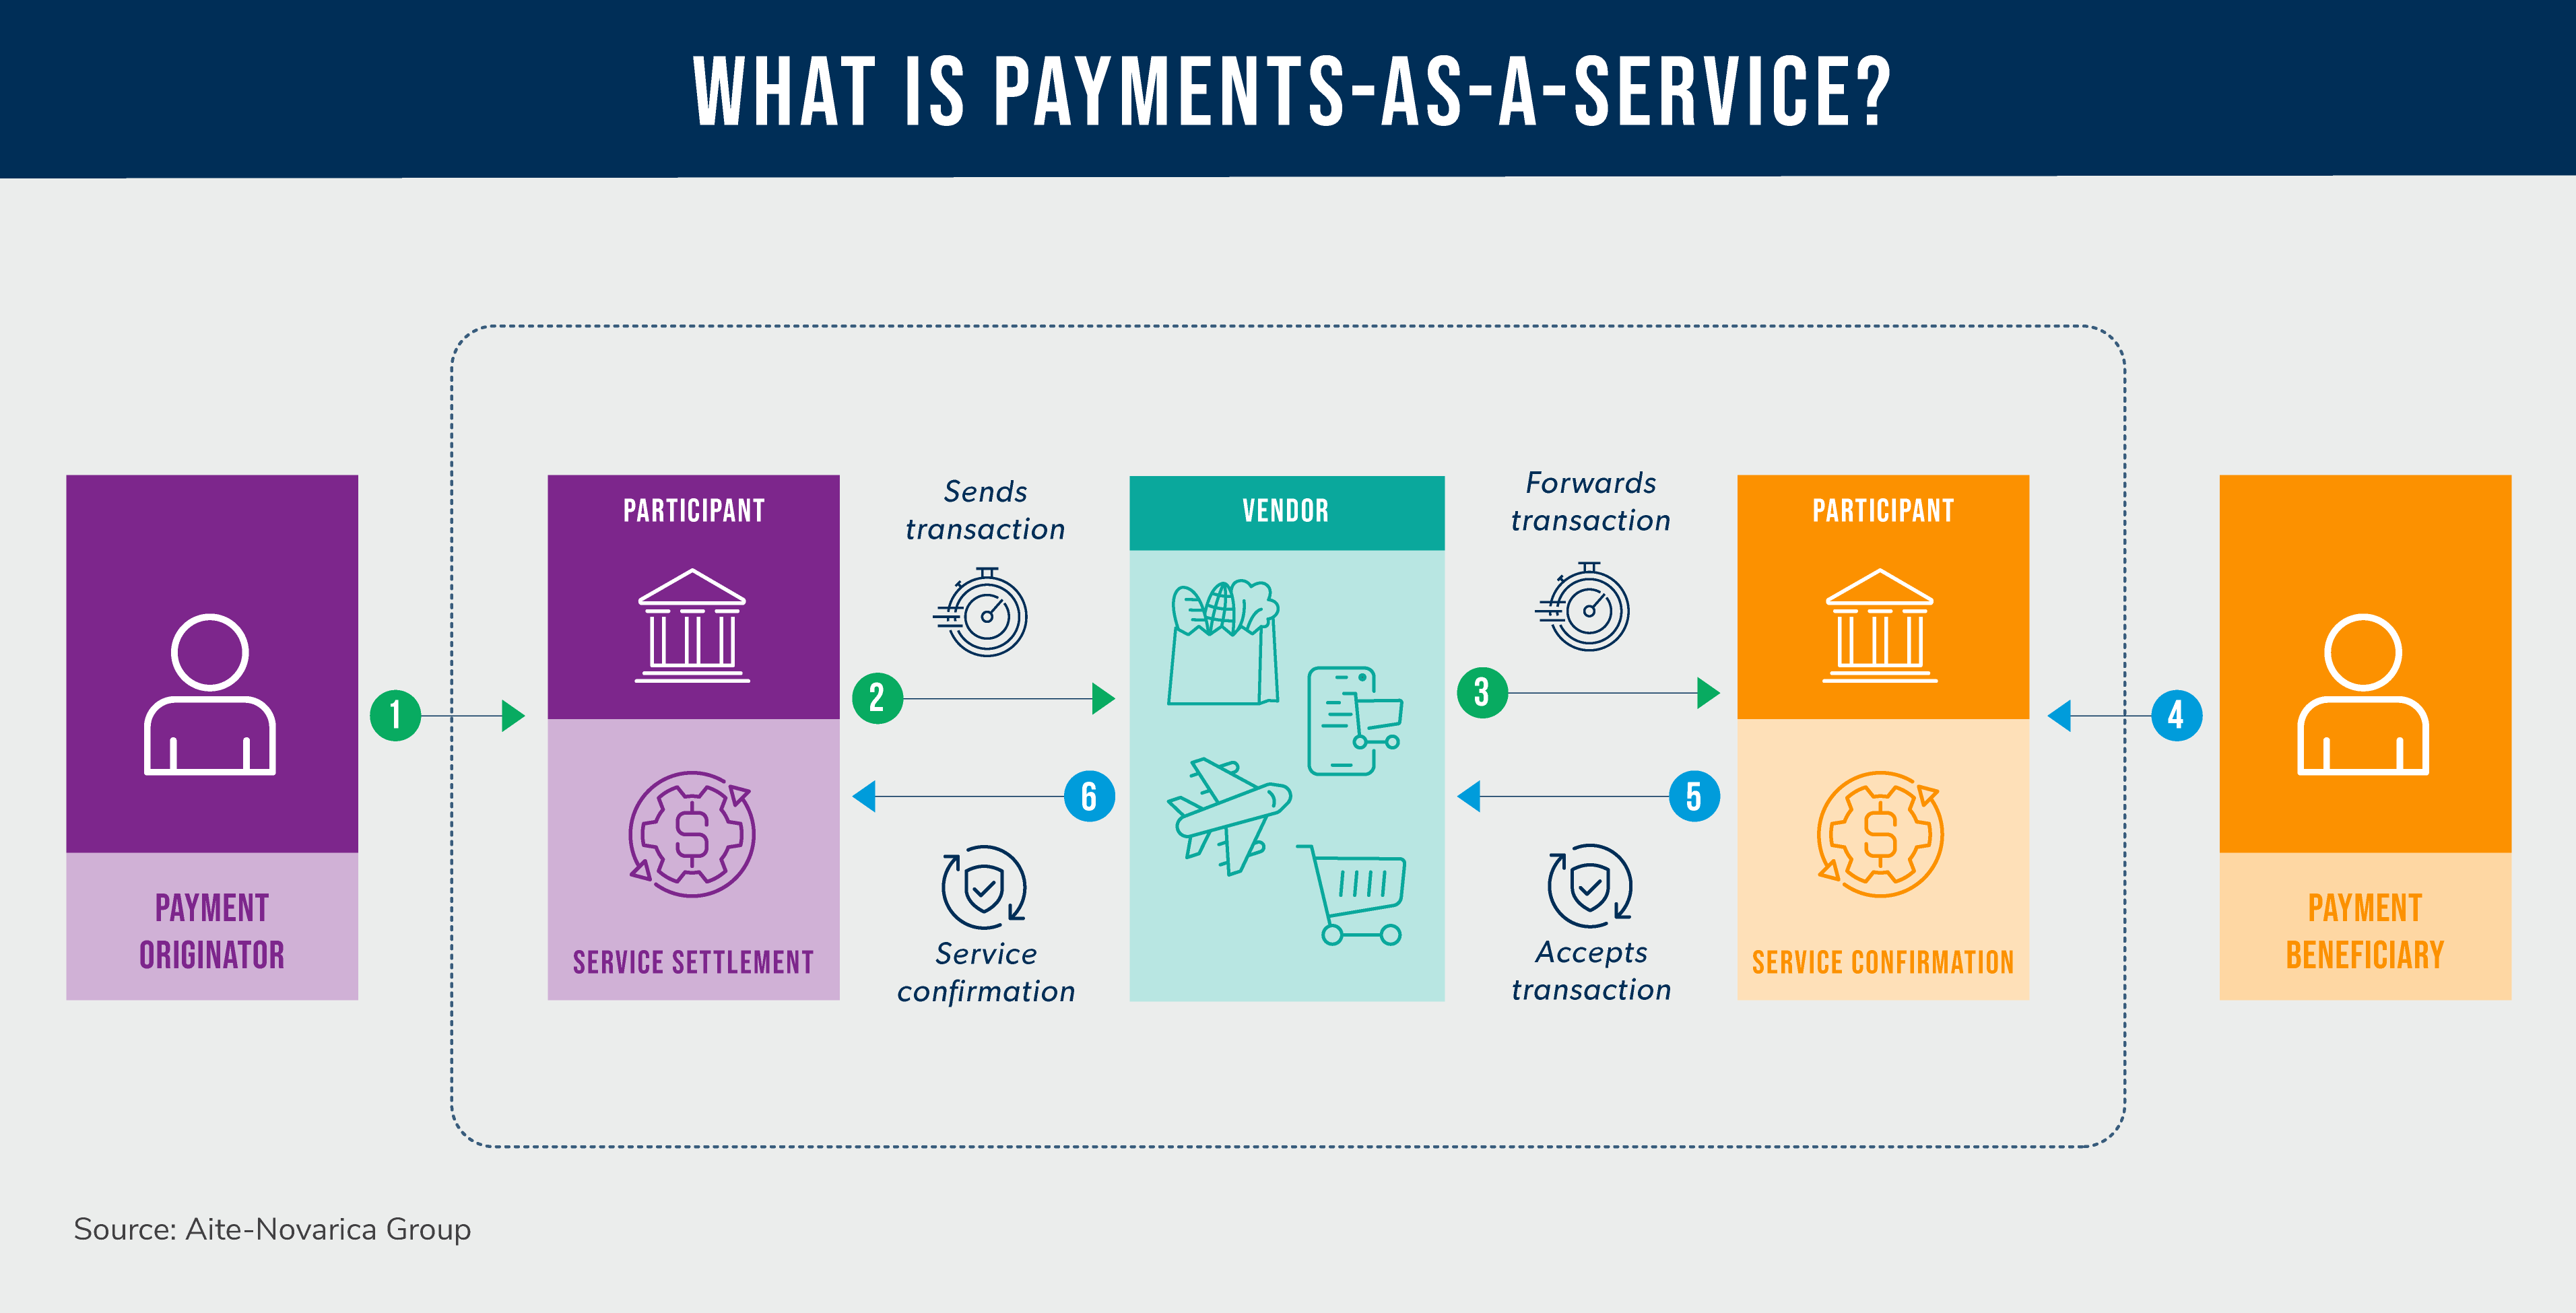 What Is Payments-as-a-Service?